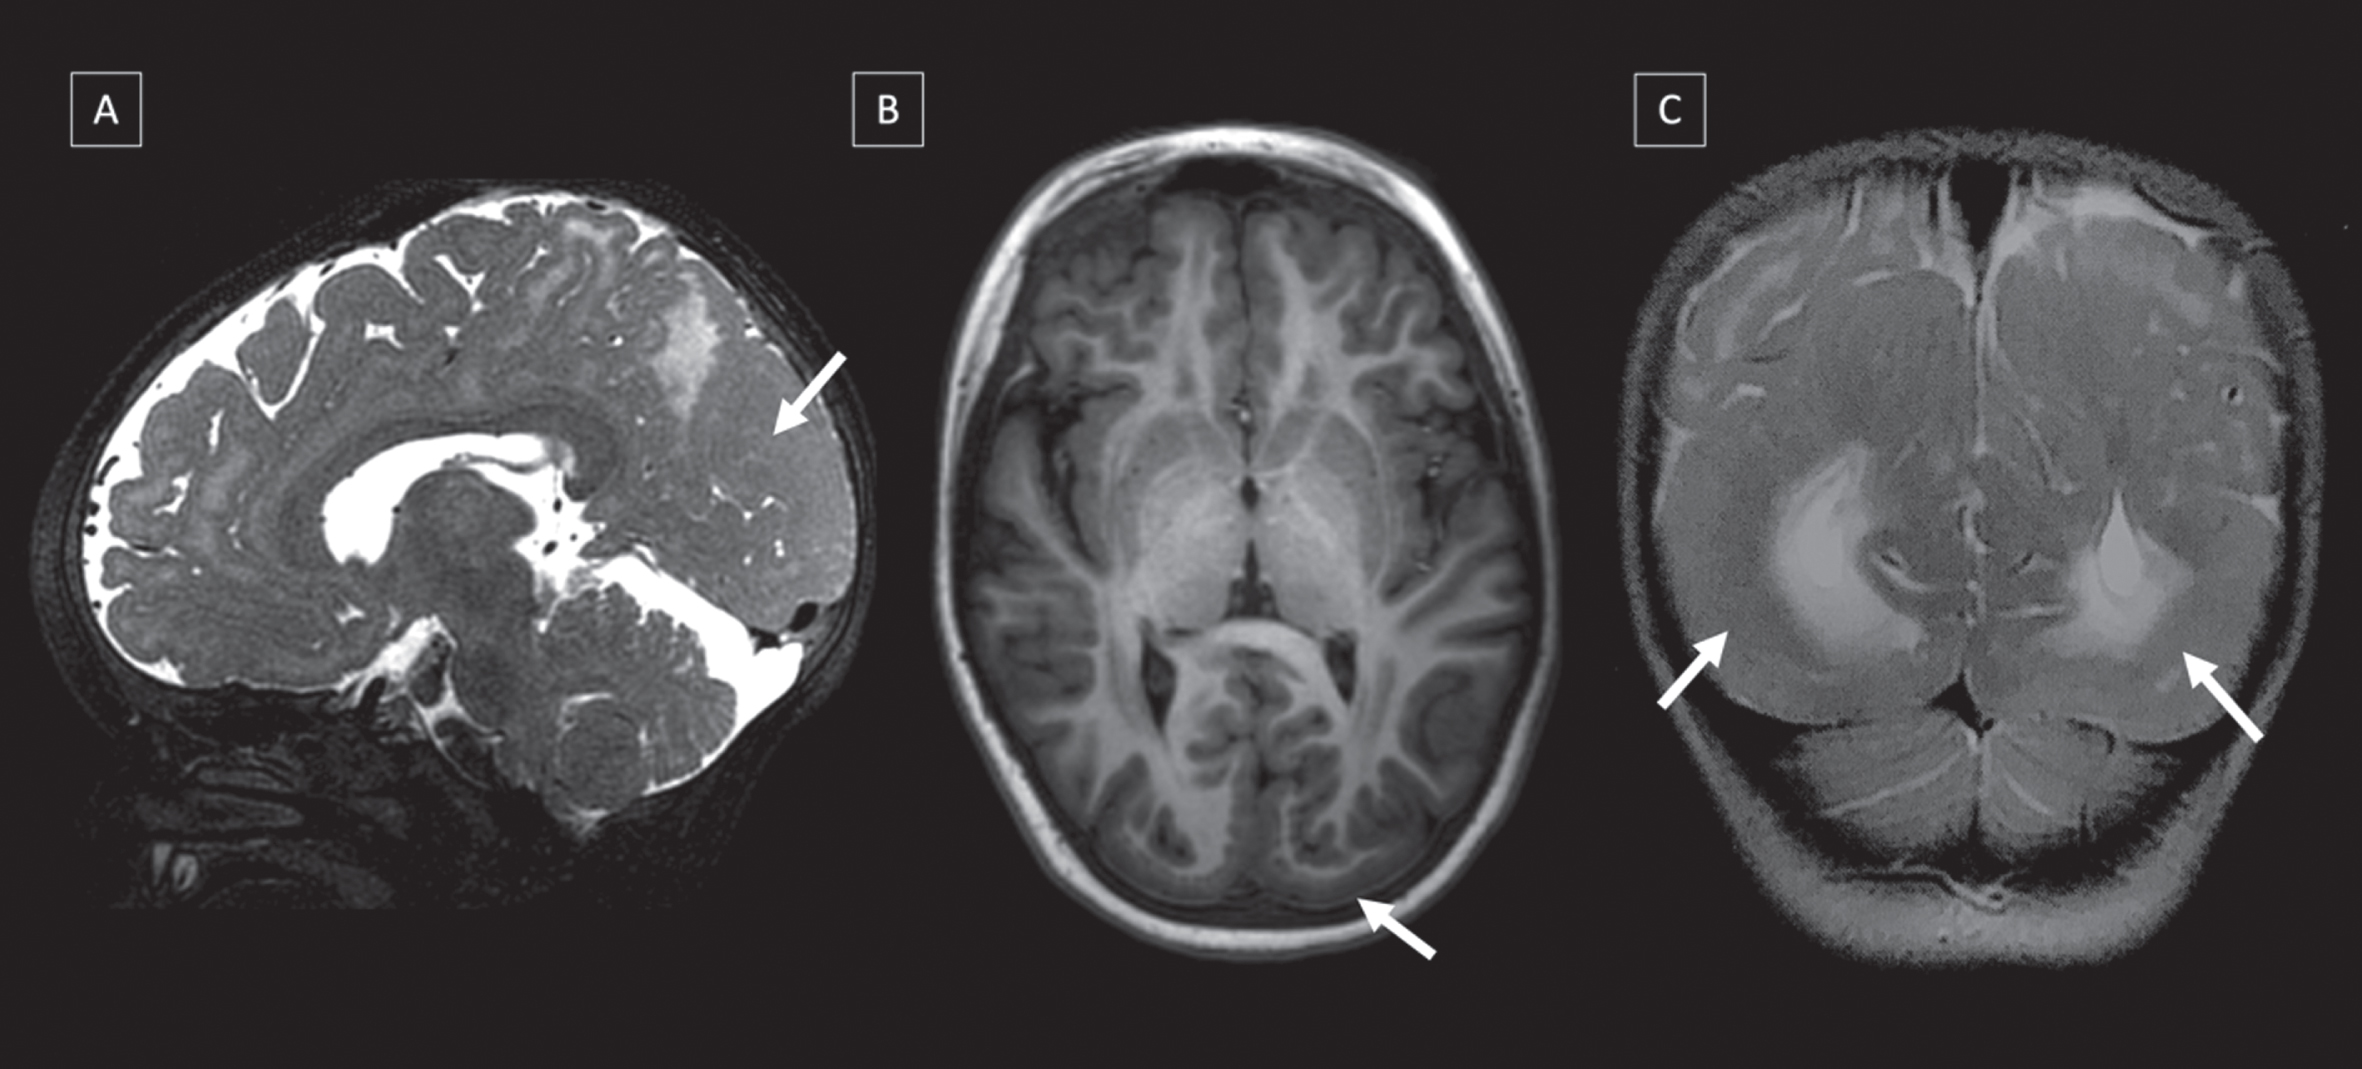 Brain malformations in three different CMD-LAMA2 patients MRI’s: (A) Lissencephaly-pachygyria in occipital lobe (T2-WI), (B) Polymicrogyria and cobblestone in occipital lobe in (T1-WI), and (C) Pachygyria in occipital and temporal lobes in (T2-WI).